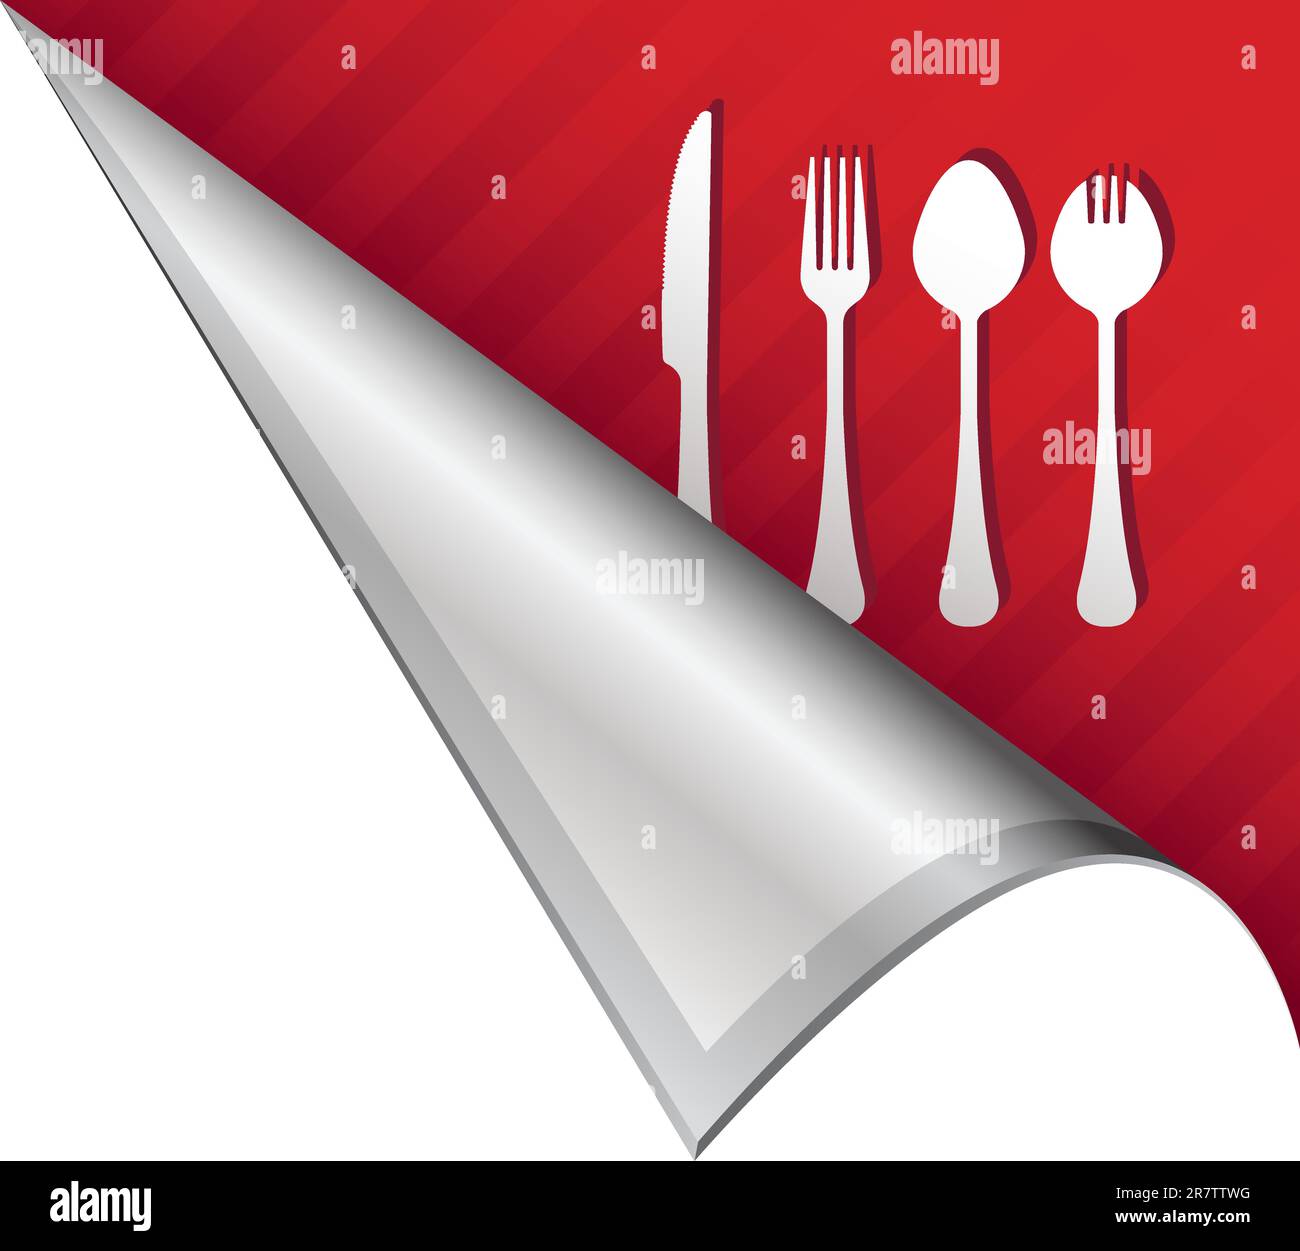 Dining or eating utensils food icon on vector peeled corner tab suitable for use in print, on websites, or in advertising materials. Stock Vector